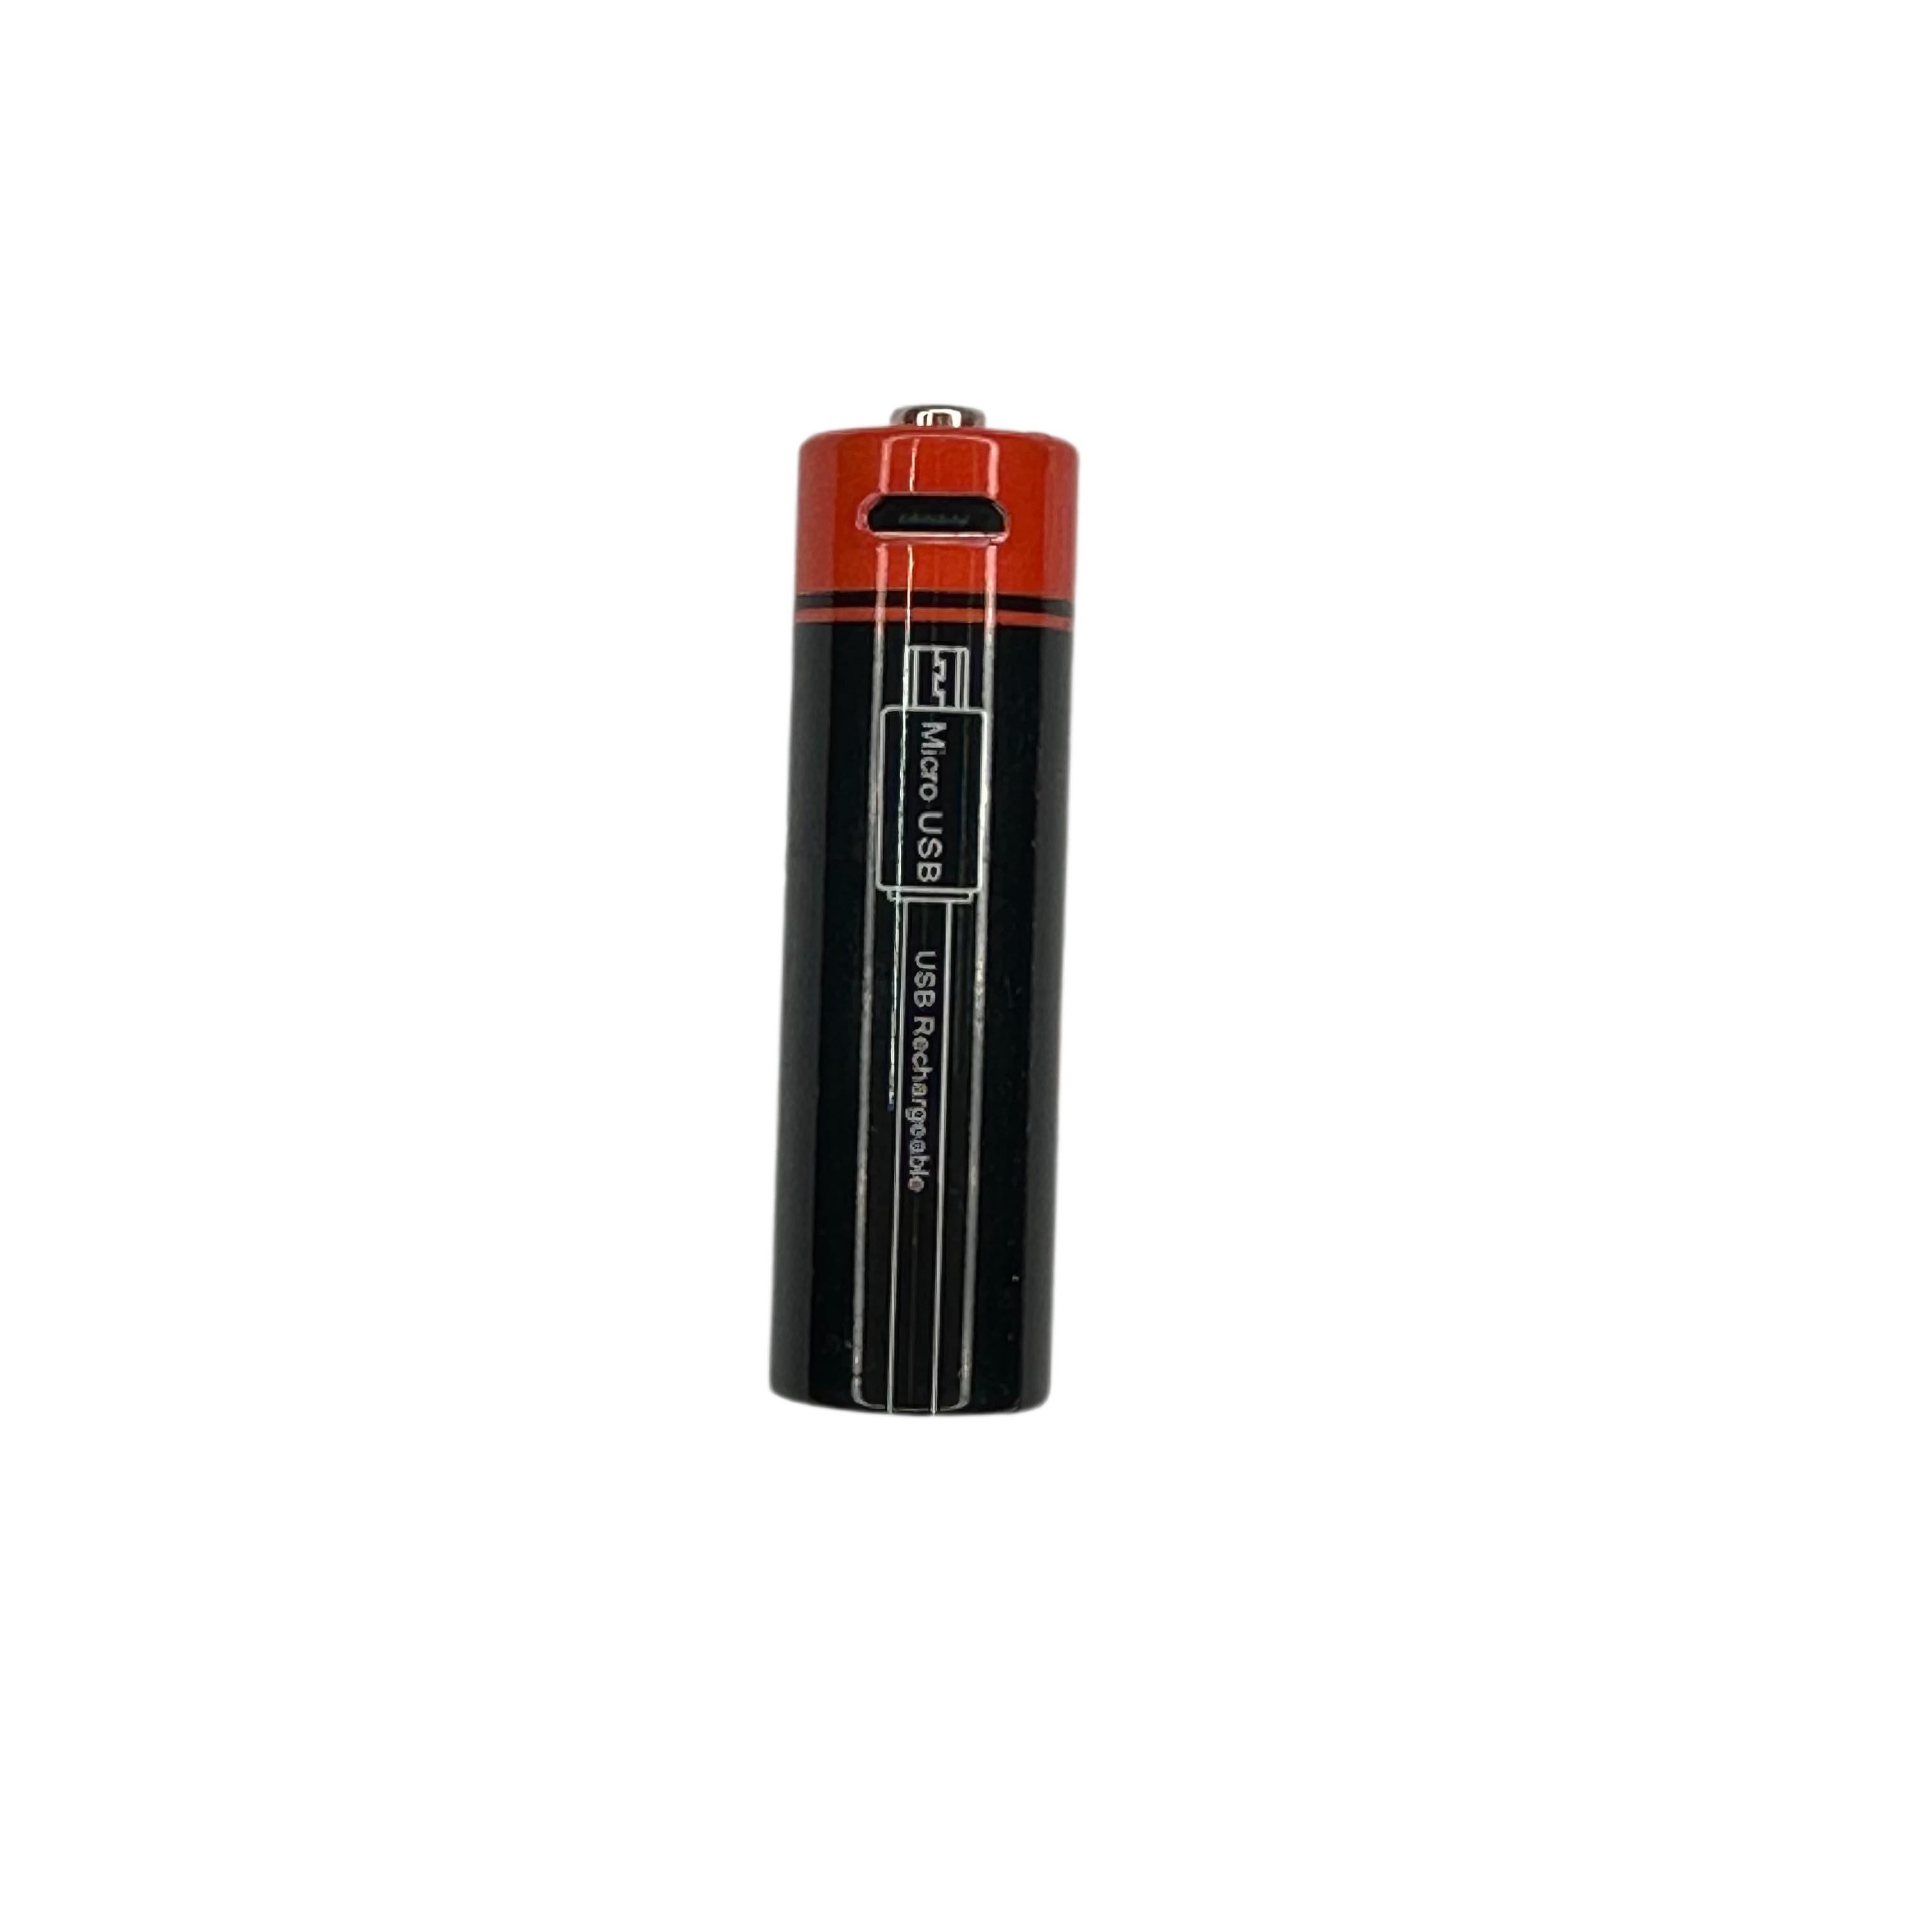 Rechargeable 14500 (AA) USB Lithium Ion Battery